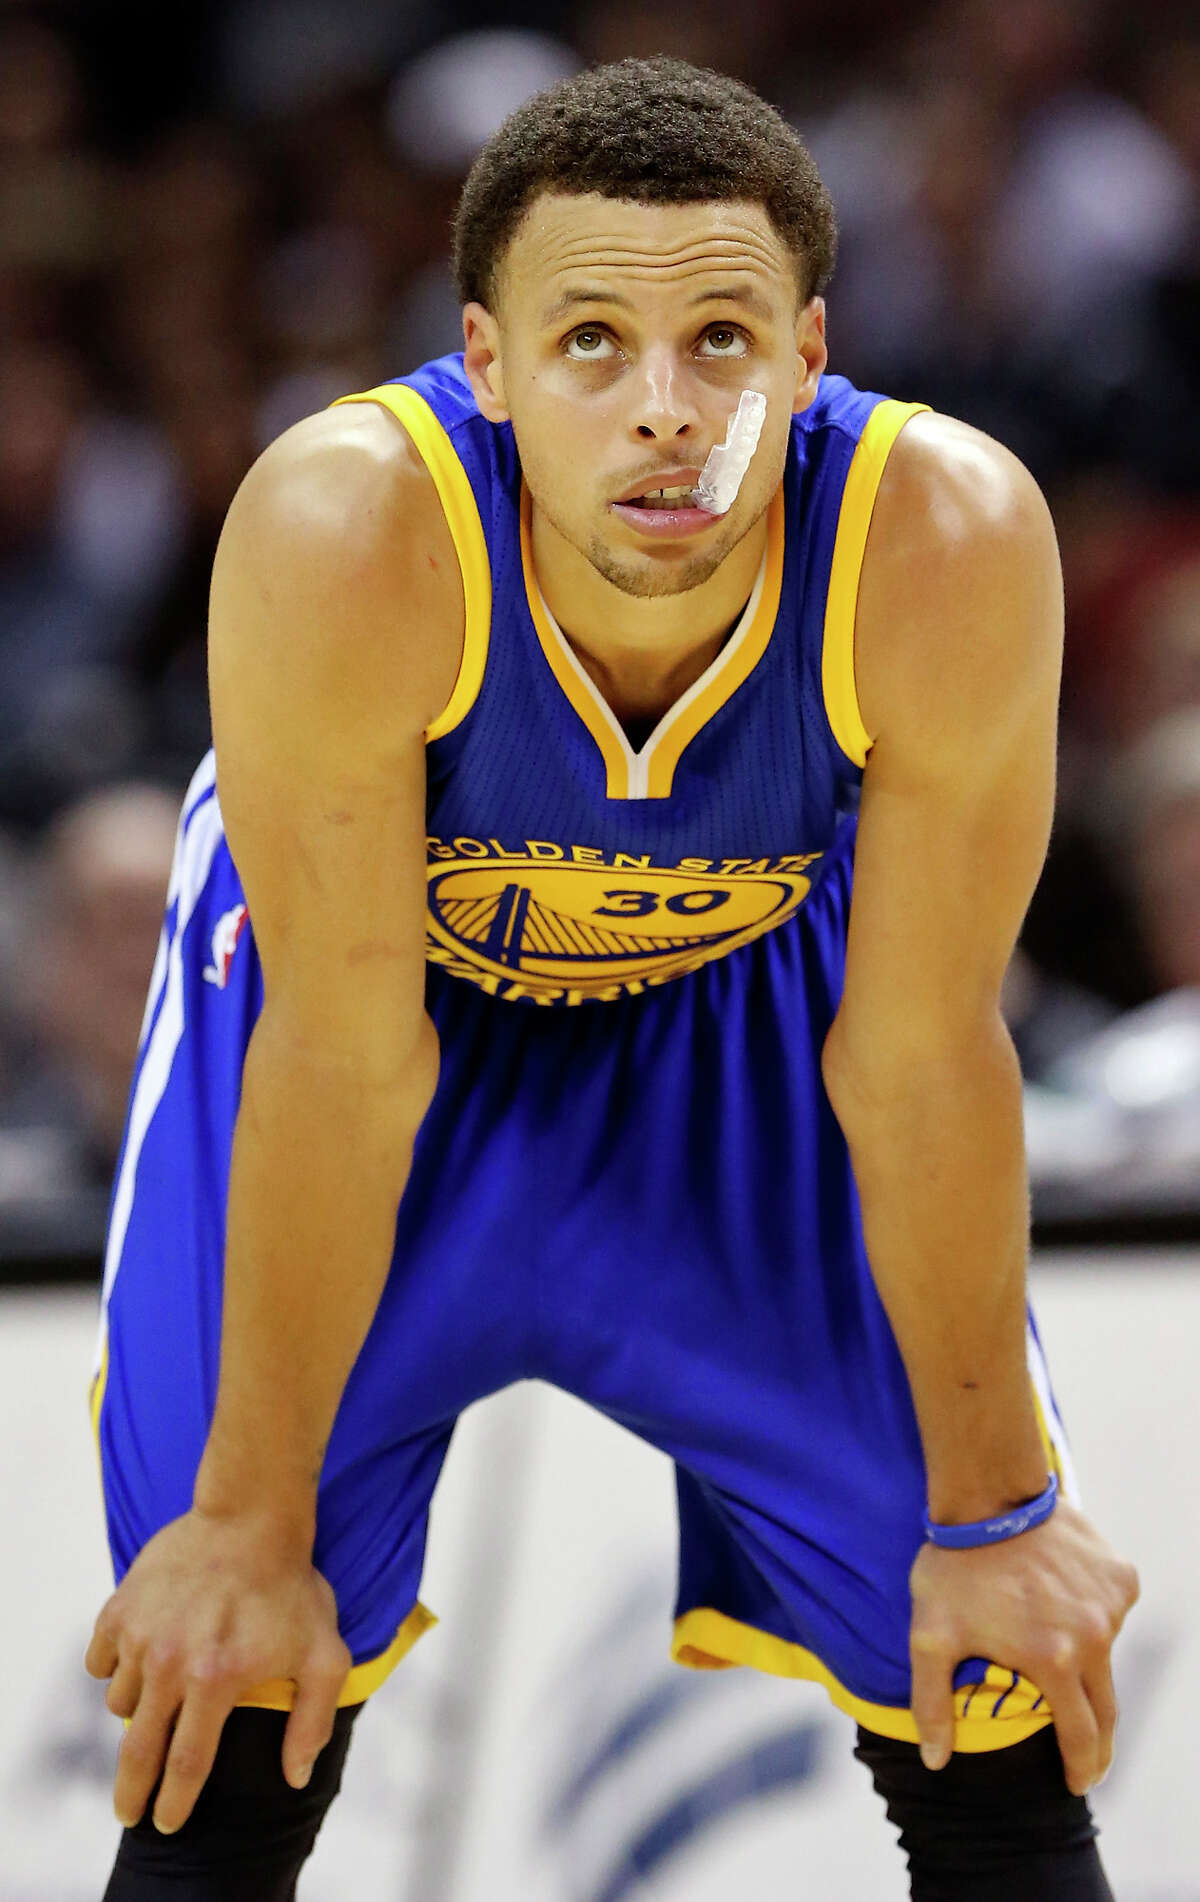 Golden State Warriors’ Stephen Curry pauses during second half action against the Spurs on April 5, 2015 at the AT&T Center.